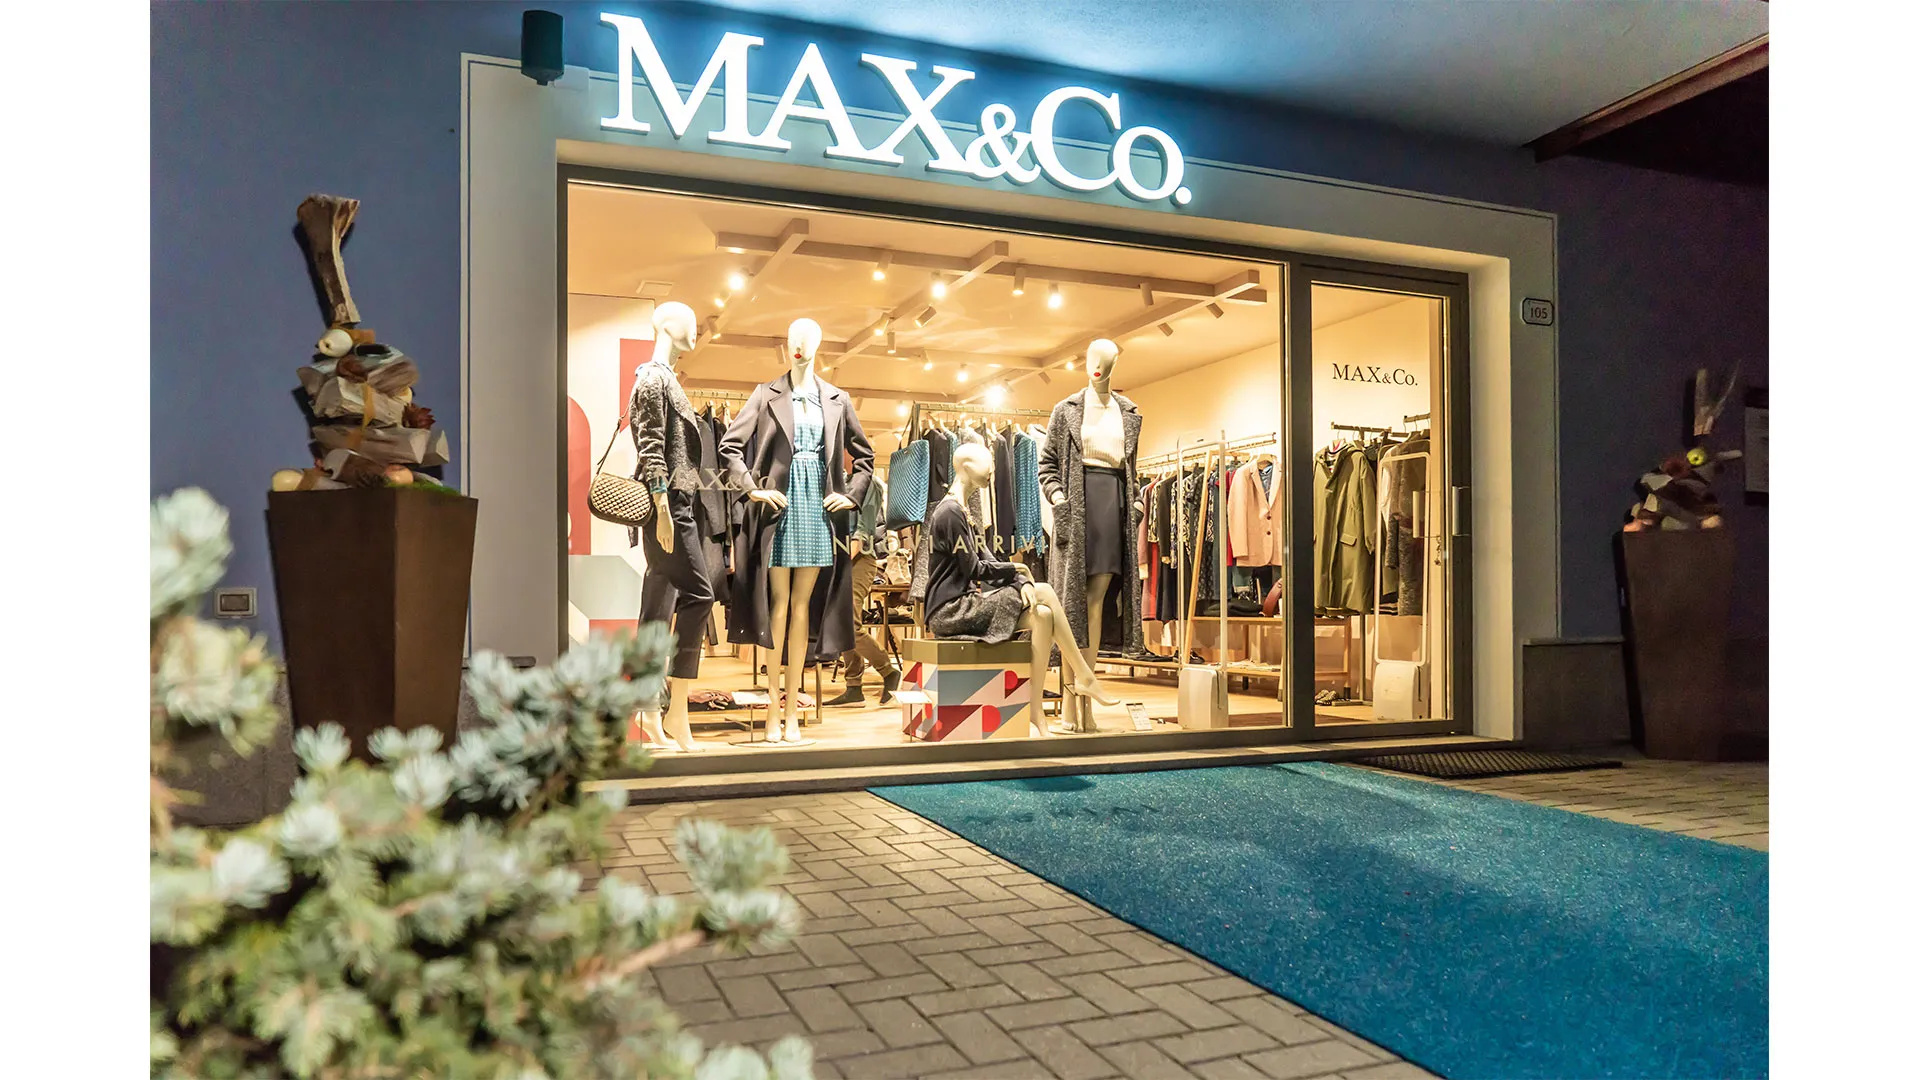 Max&Co in Italy, europe | Clothes - Country Helper